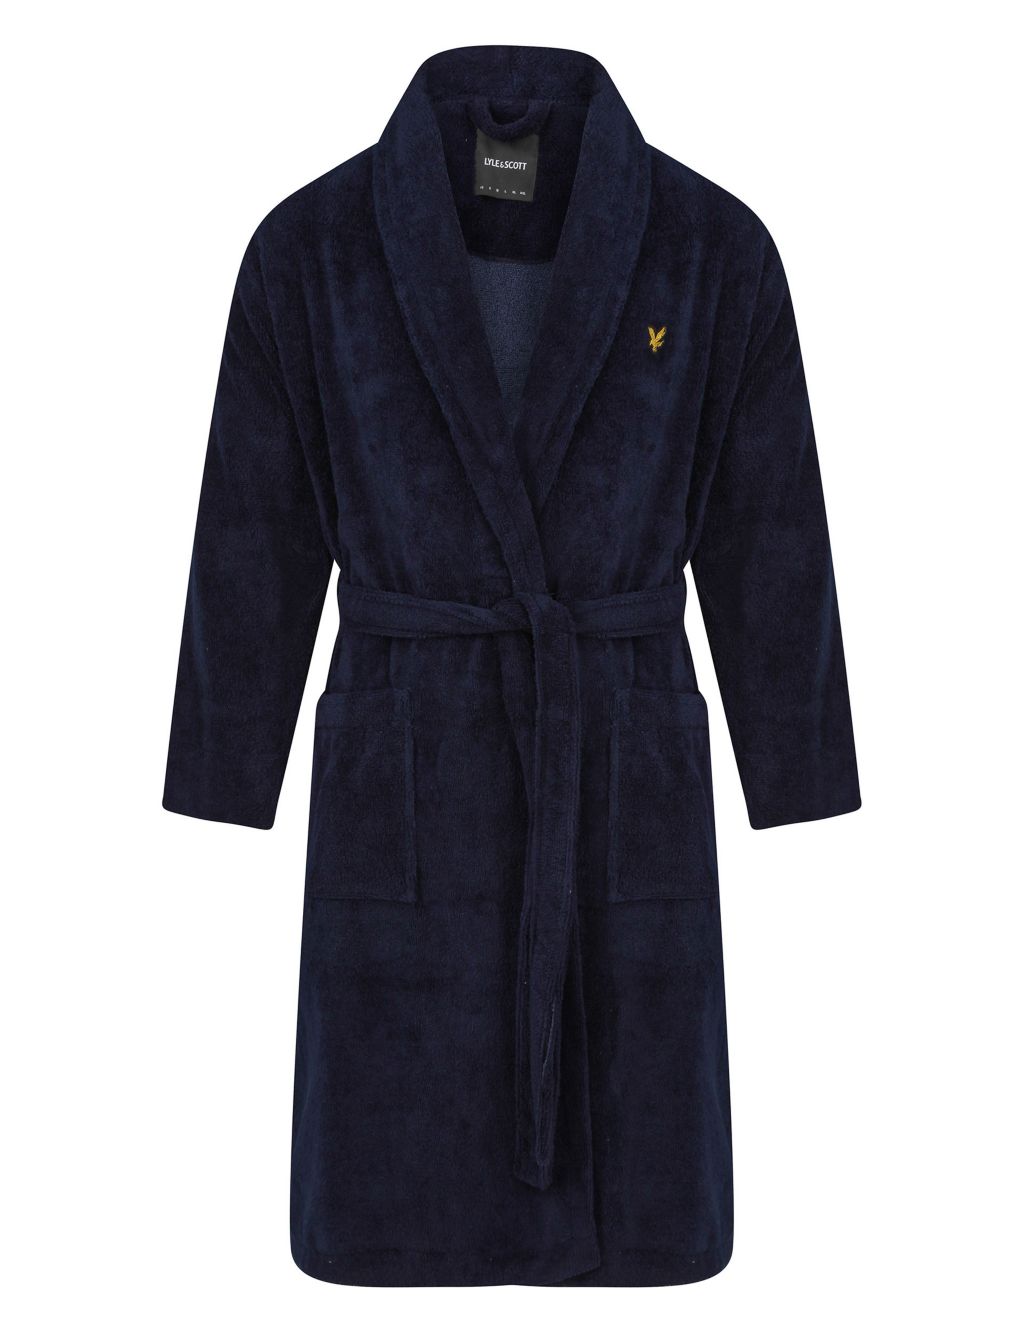 Cotton Blend Dressing Gown image 1